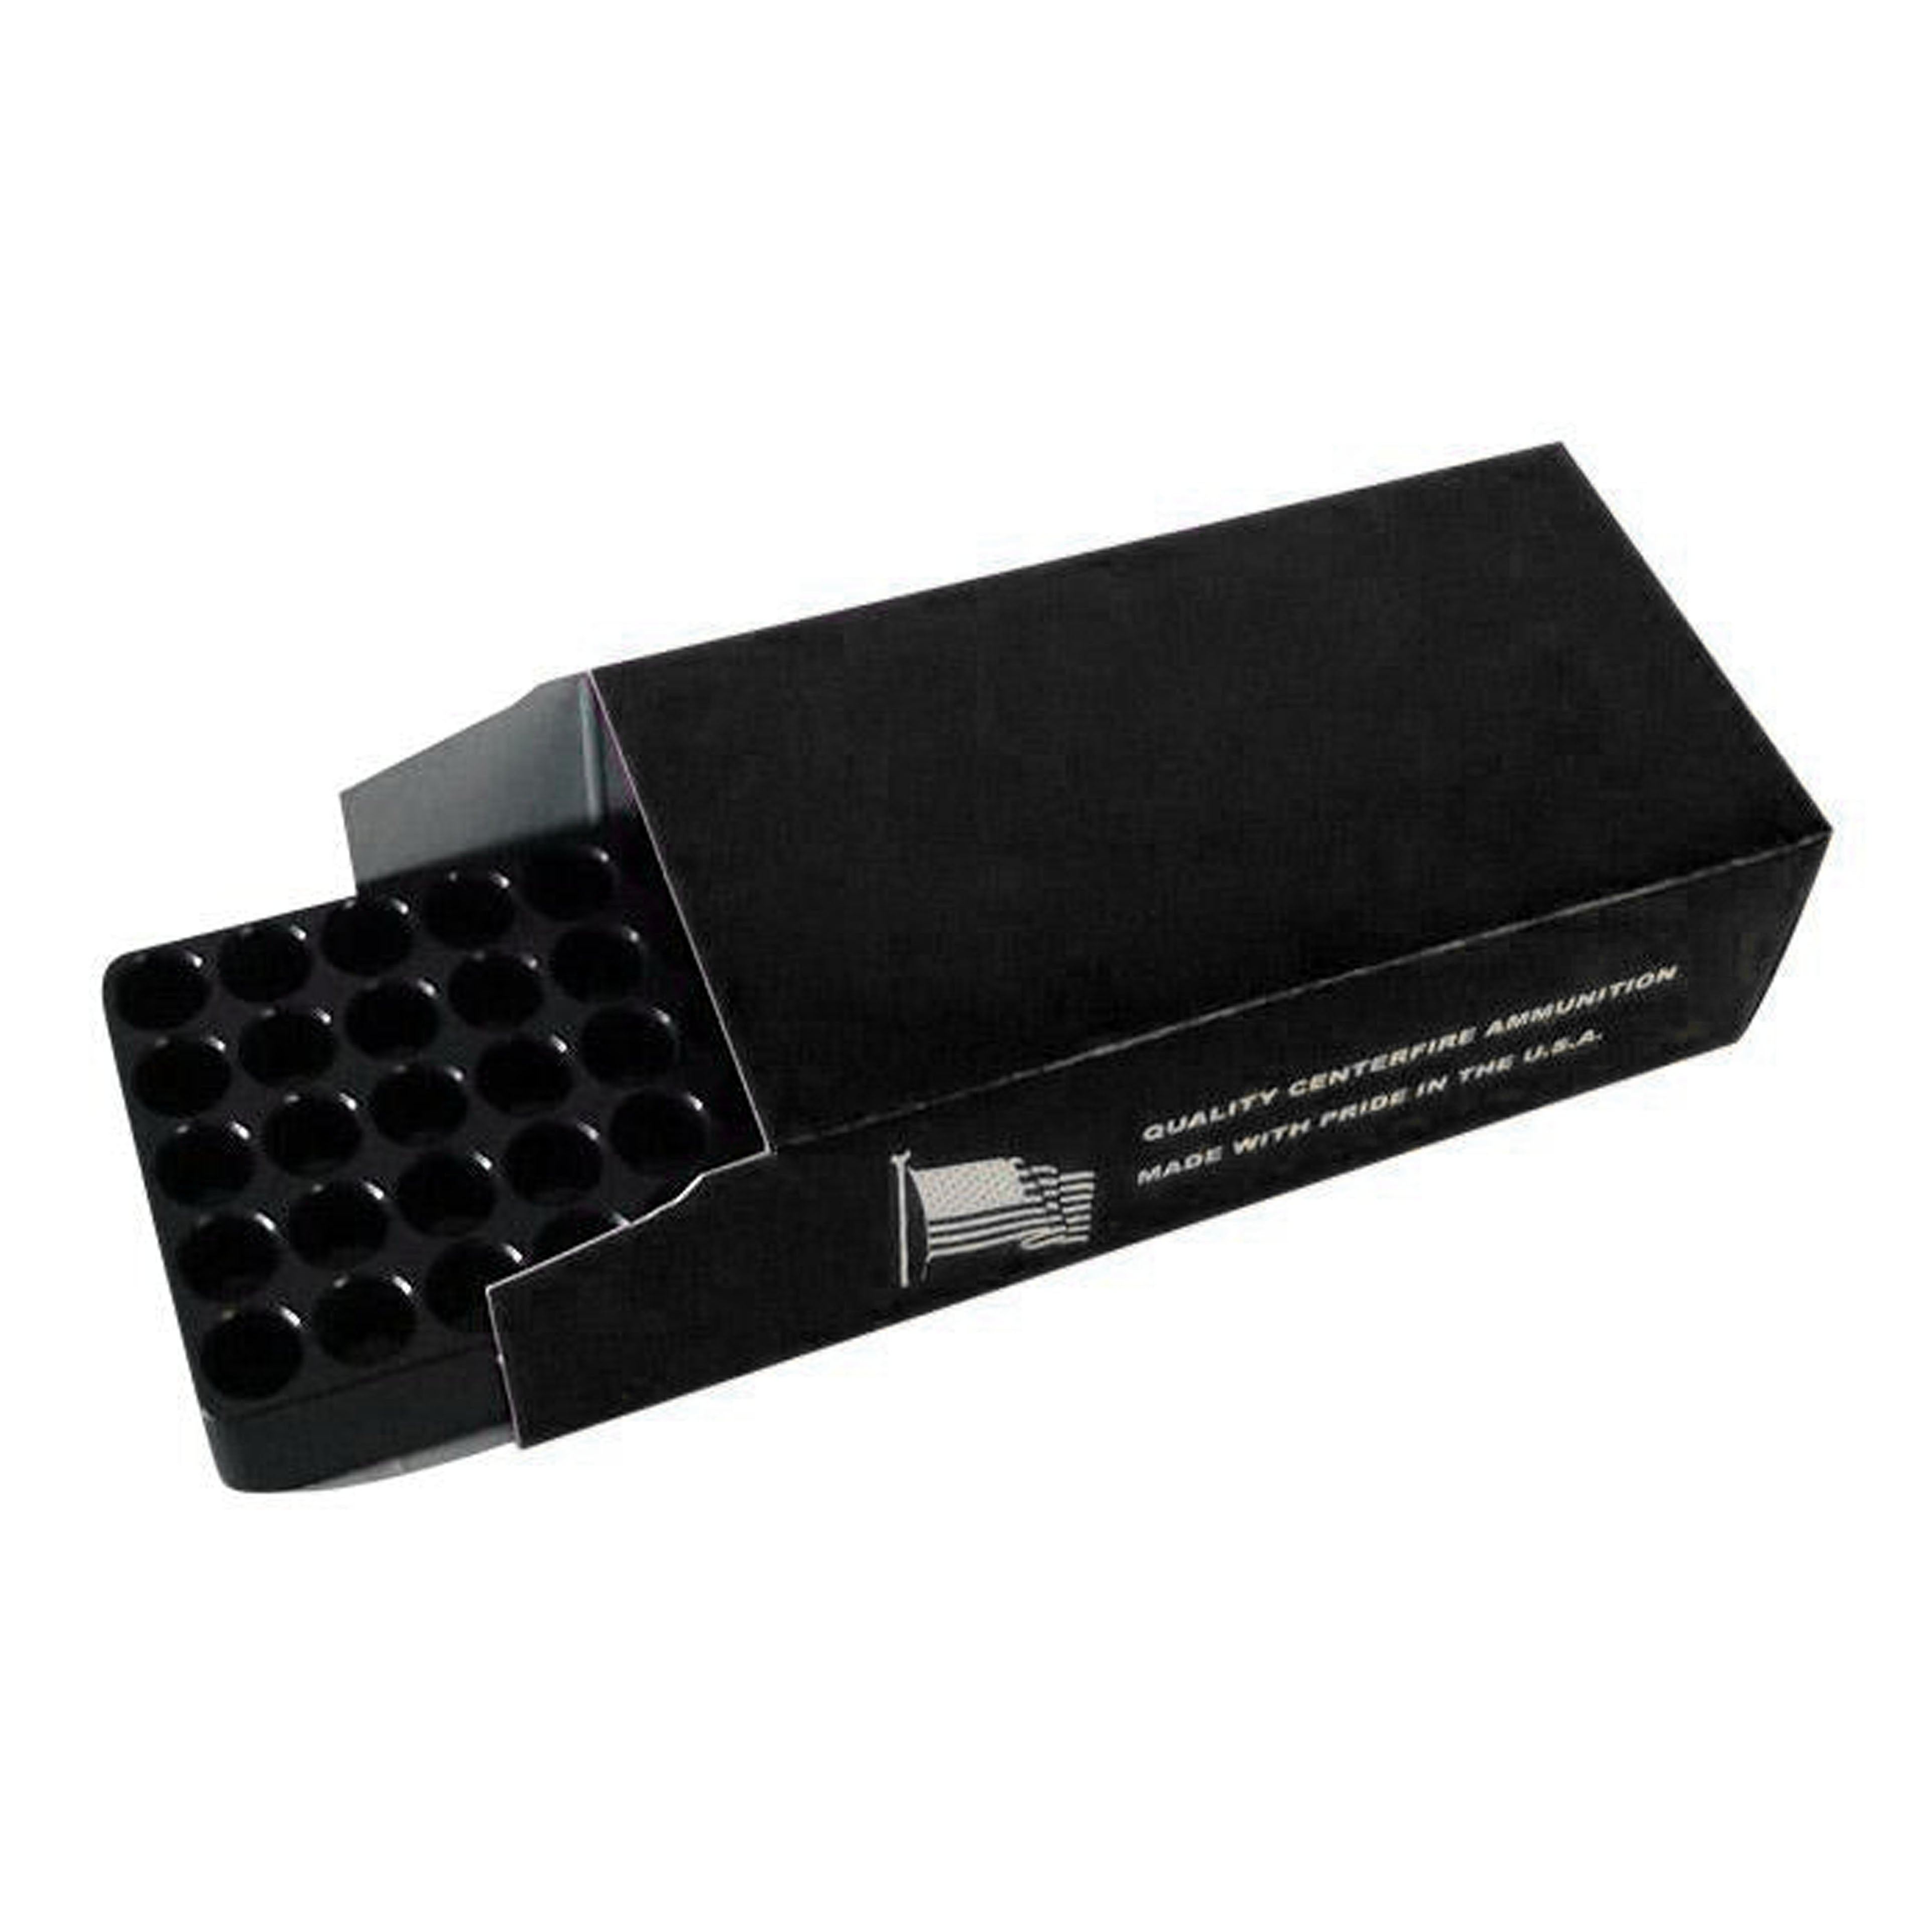 #03 Ammunition Packaging Box & Trays Combo for .38 Special / .357 Magnum  - 50 Round Capacity